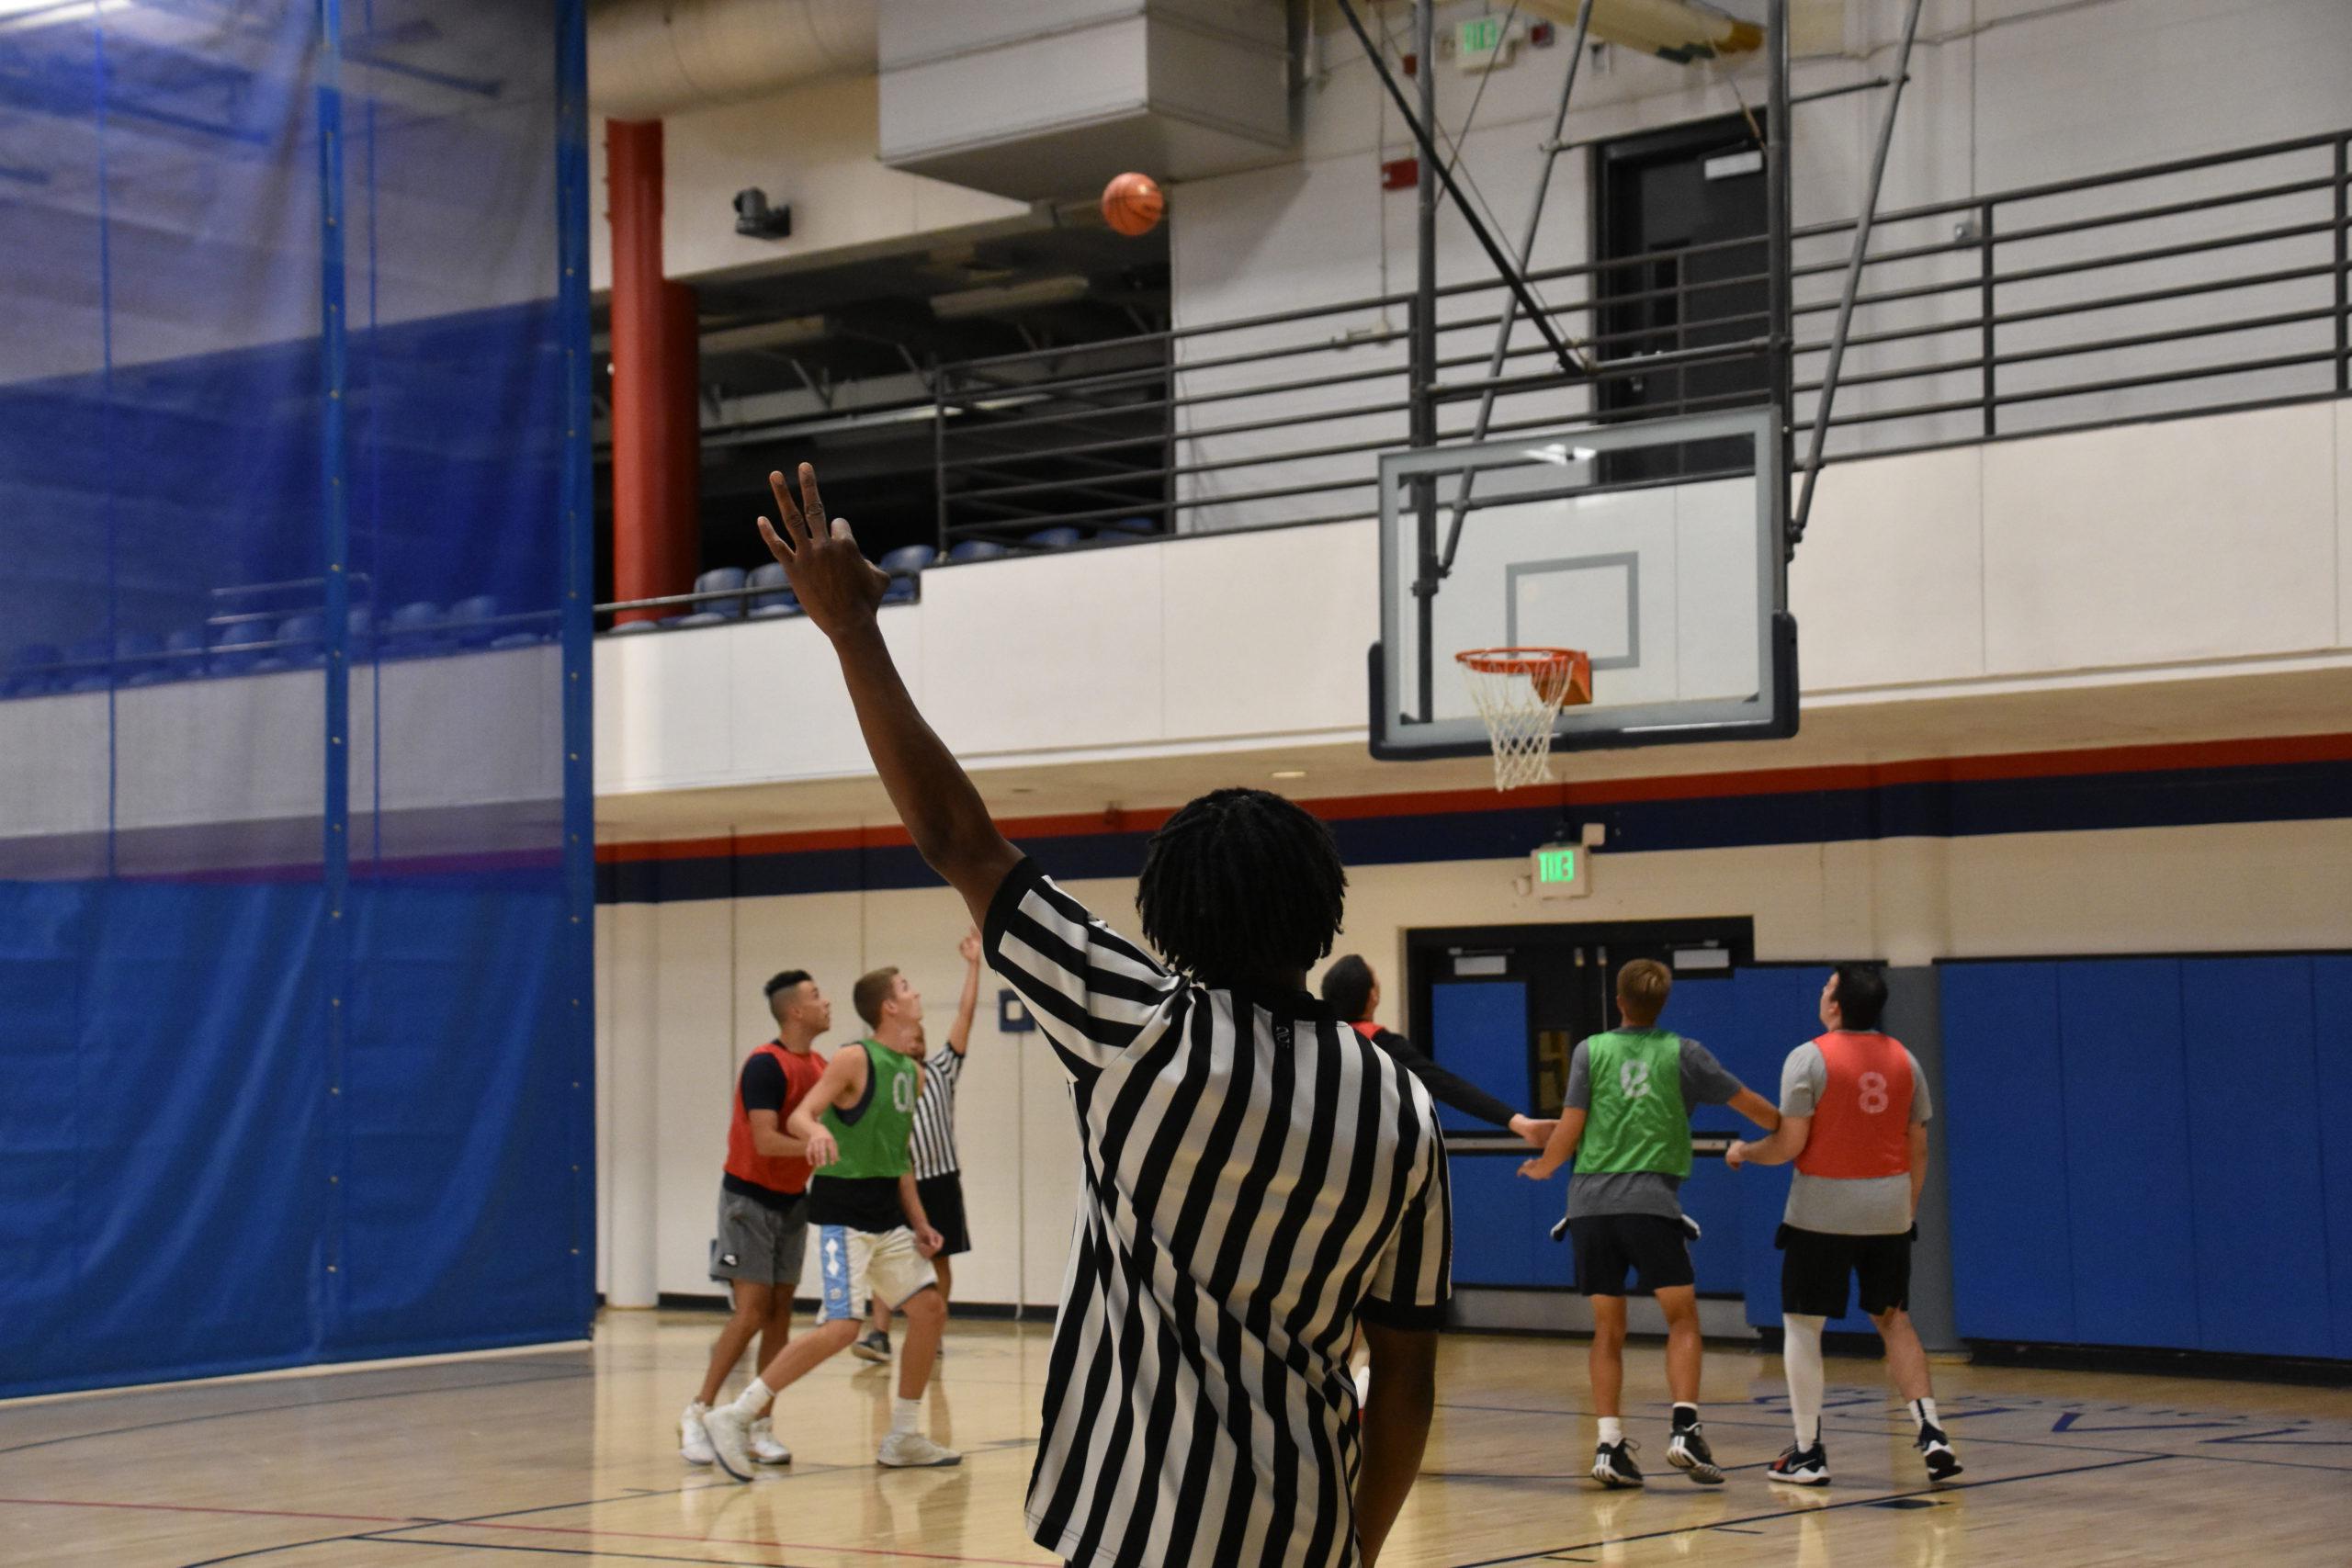 basketball official showing a 3 point attempt